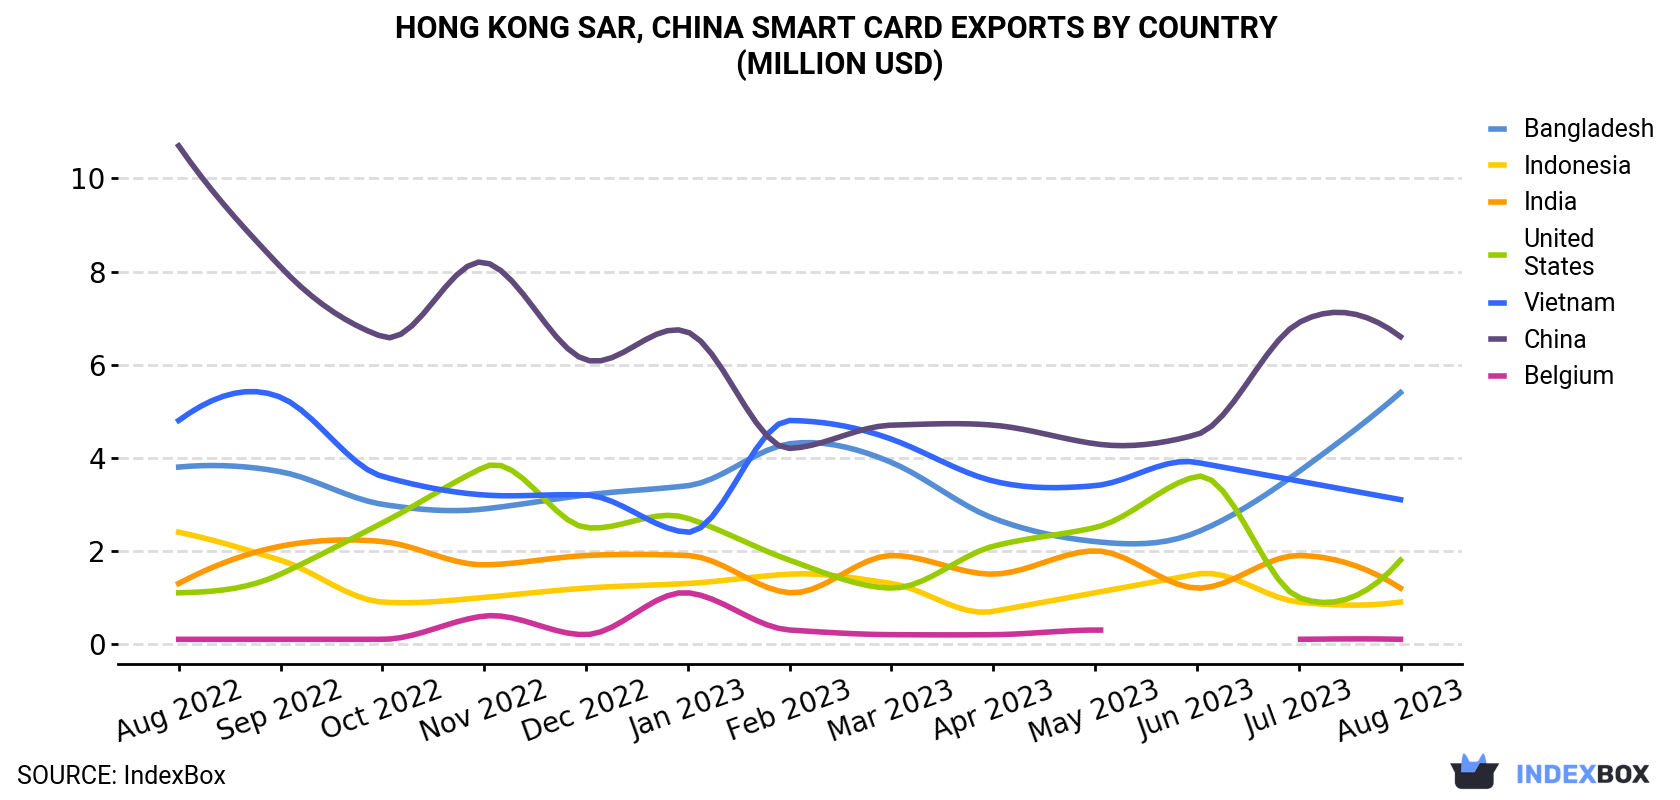 Hong Kong Smart Card Exports By Country (Million USD)